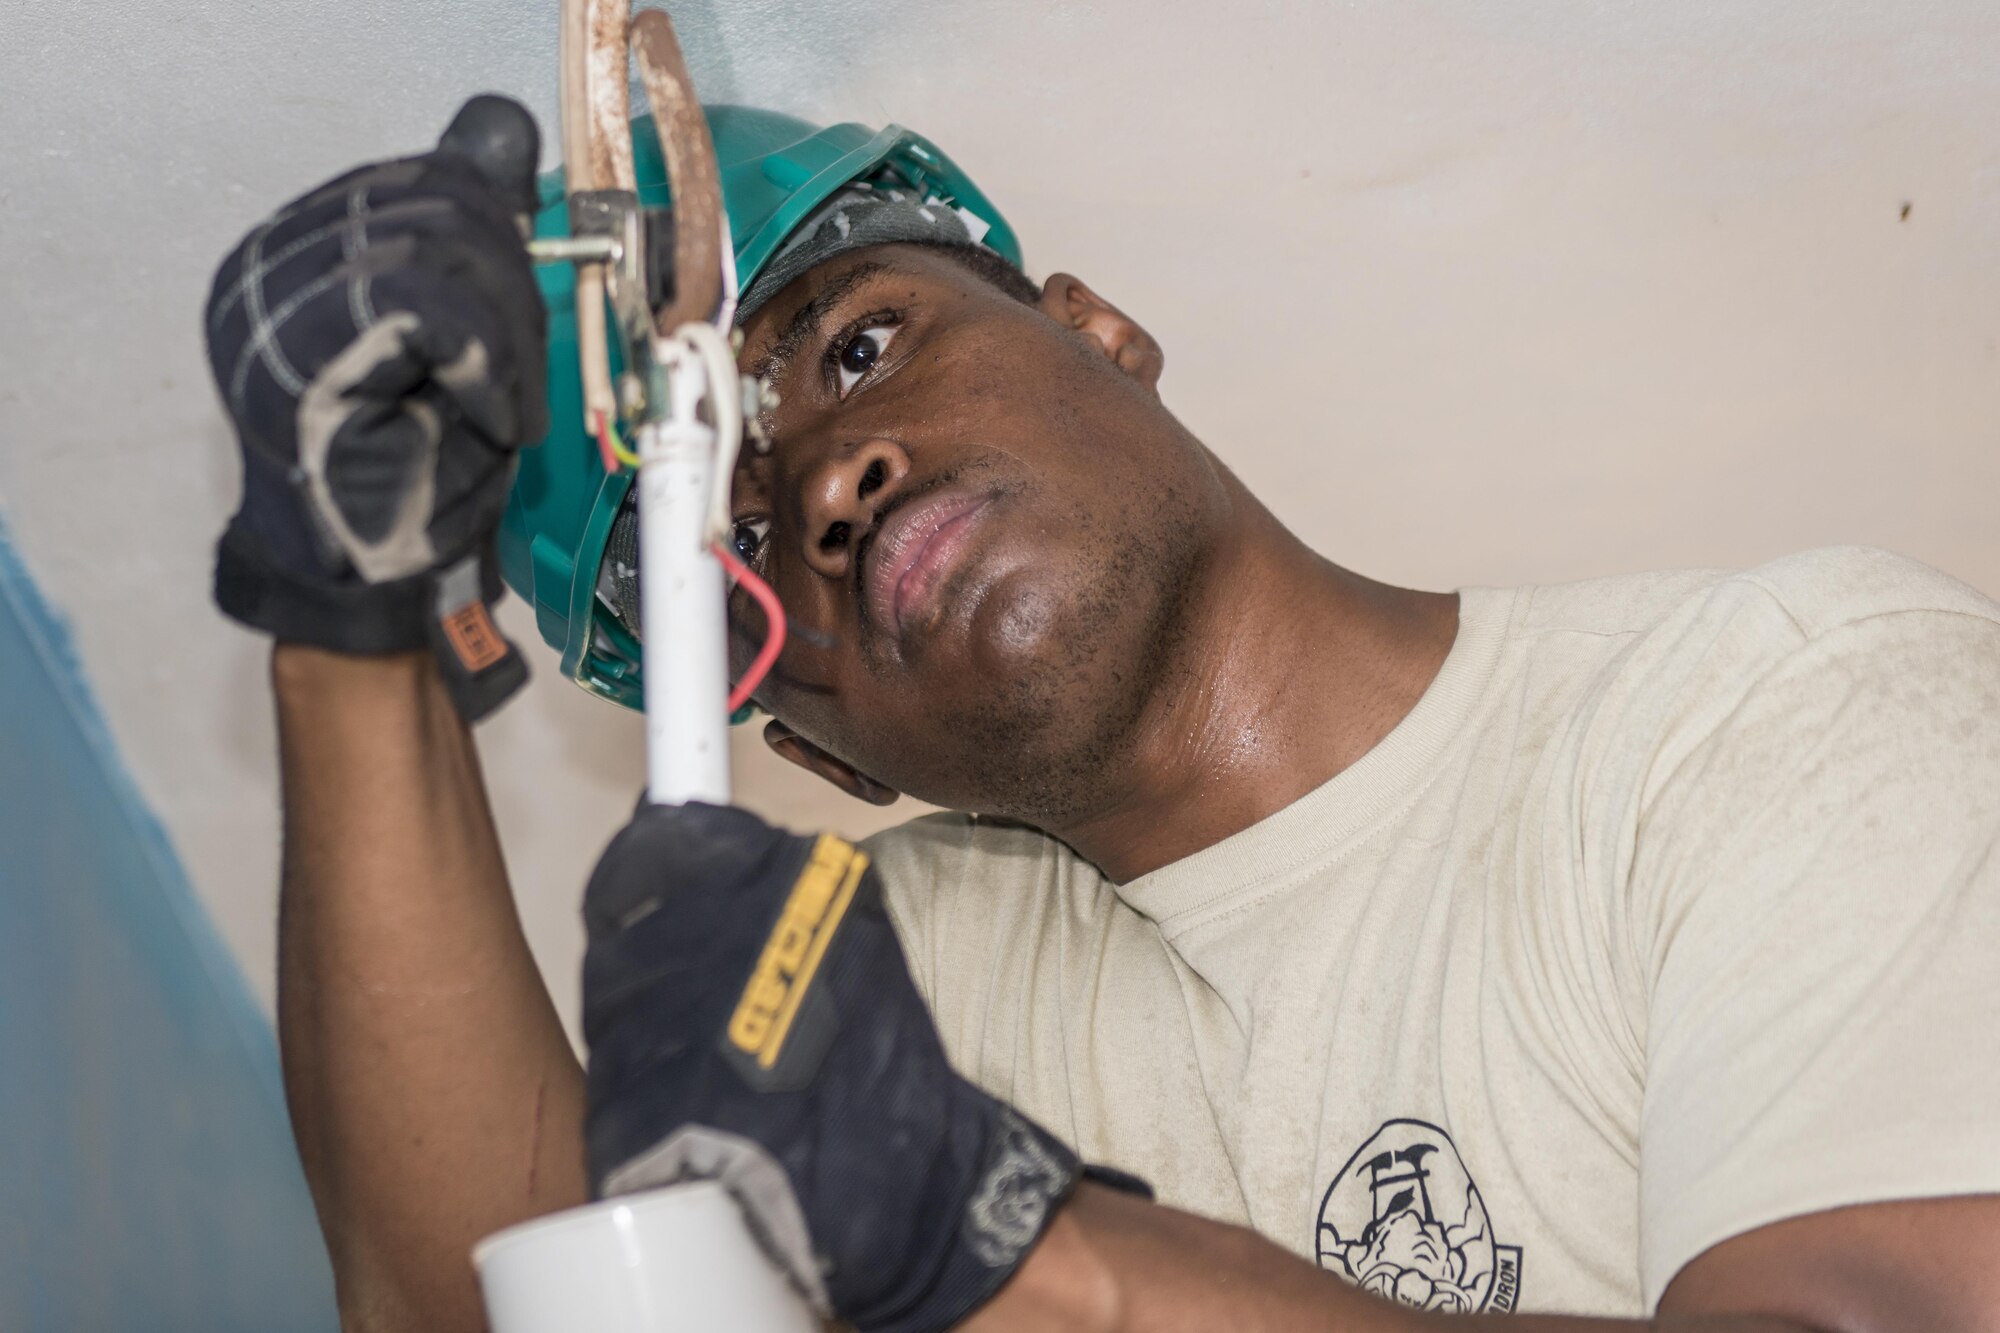 U.S. Air Force Staff Sgt. Quintin Robinson, an electrician with the 374th Civil Engineer Squadron at Yokota Air Base, Japan, rewires a ceiling fan at Khalsa Primary School during Pacific Angel (PACANGEL) 17-3 in Ba, Fiji, July 18, 2017. Robinson joined two U.S. Air Force water and fuels specialists and their Fijian counterparts in Ba, working hand-in-hand to ensure the children and their teachers could have operable ceiling fans and running water. PACANGEL 17-3 strengthens participating armed forces and nongovernmental organizations interoperability so they can be ready in the event of an unforeseen natural disaster such as the cyclone that hit Fiji in 2015. (U.S. Air Force photo/Tech. Sgt. Benjamin W. Stratton)